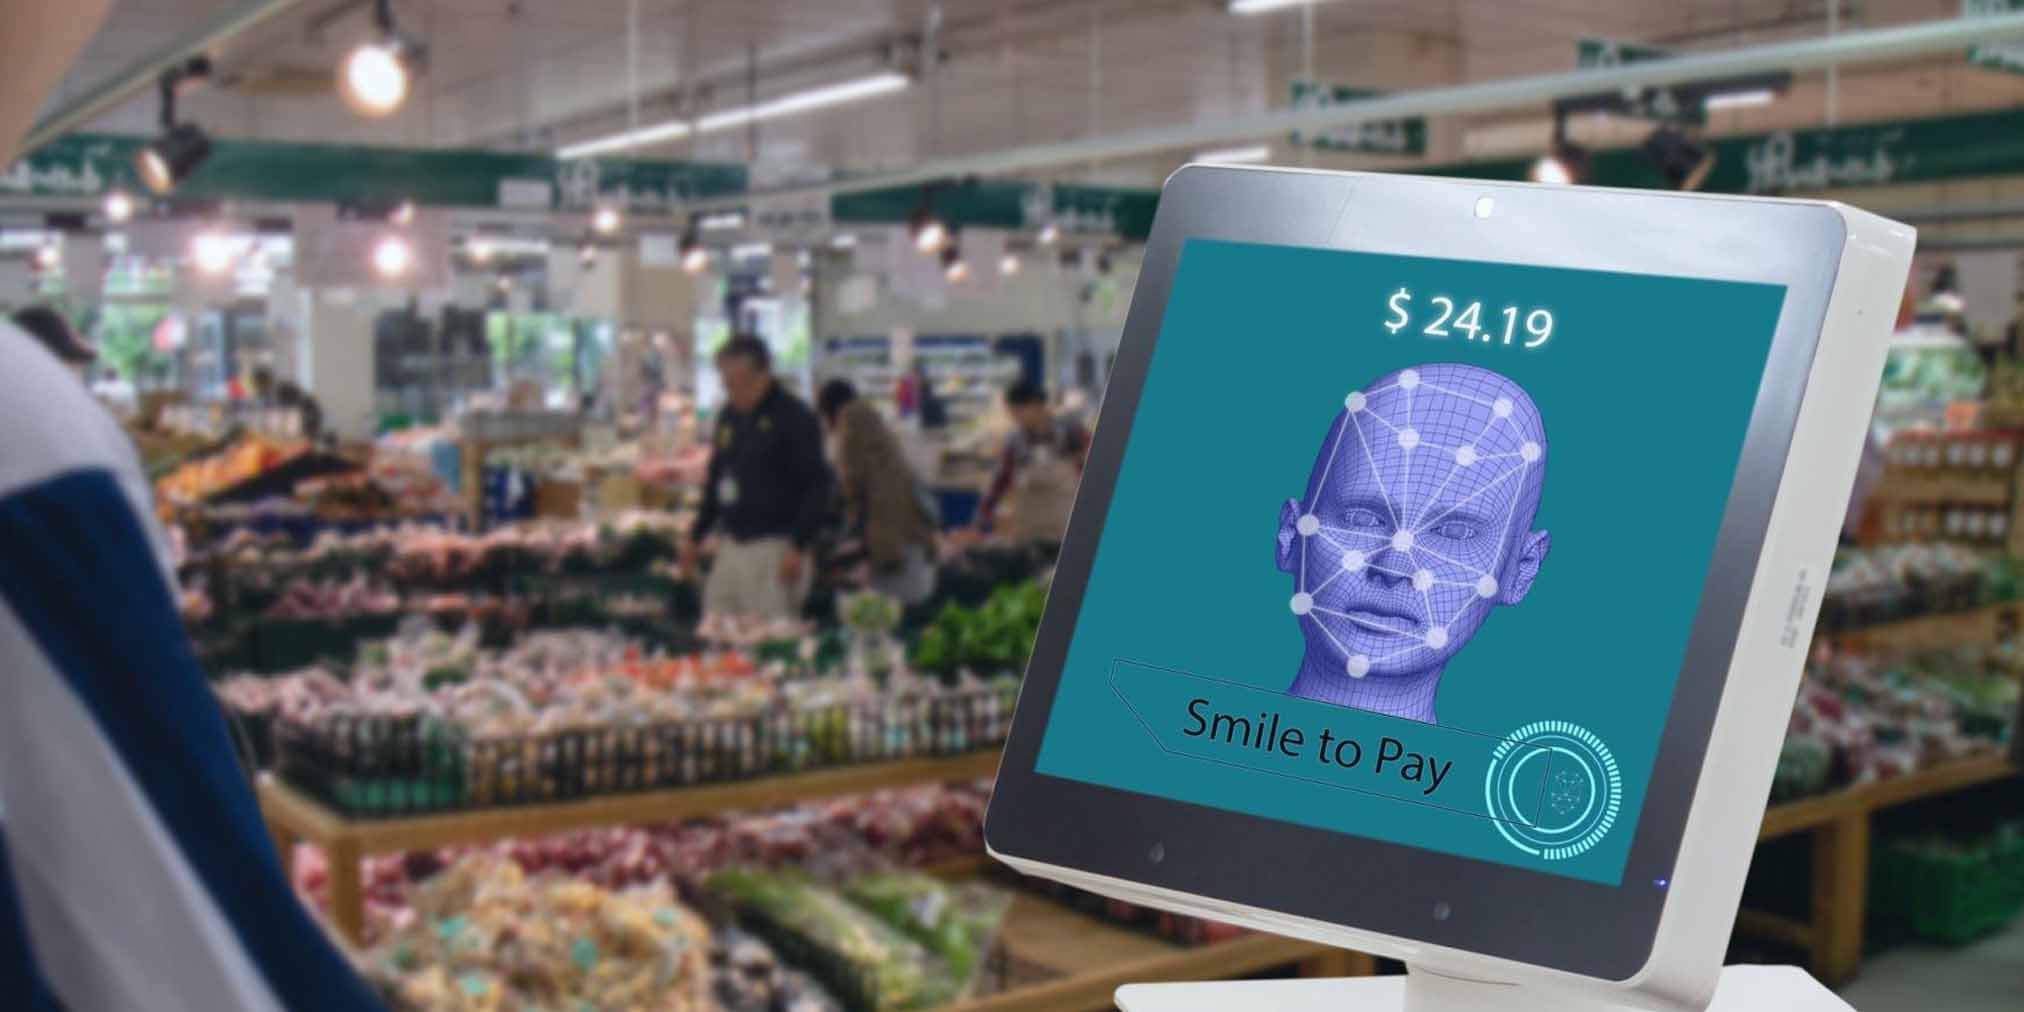 Examples of retailers successfully leveraging AI technology